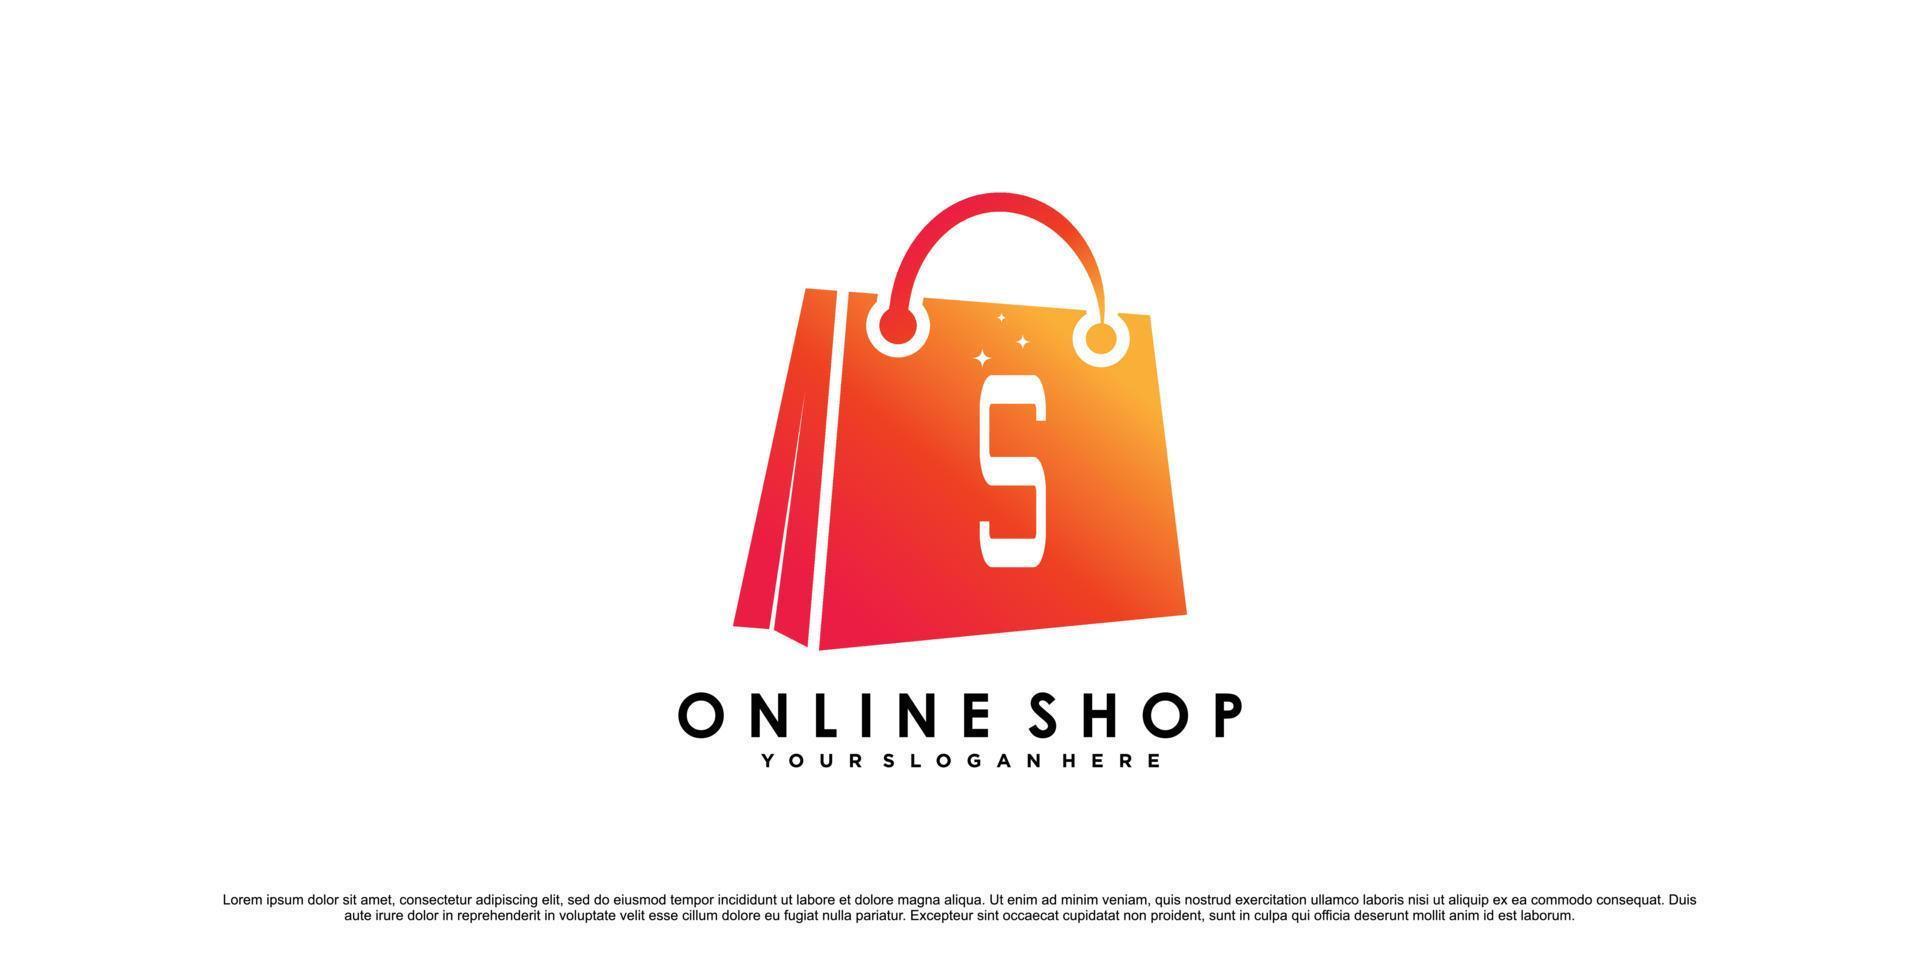 Online shop logo design for commerce business icon with modern style concept Premium Vector